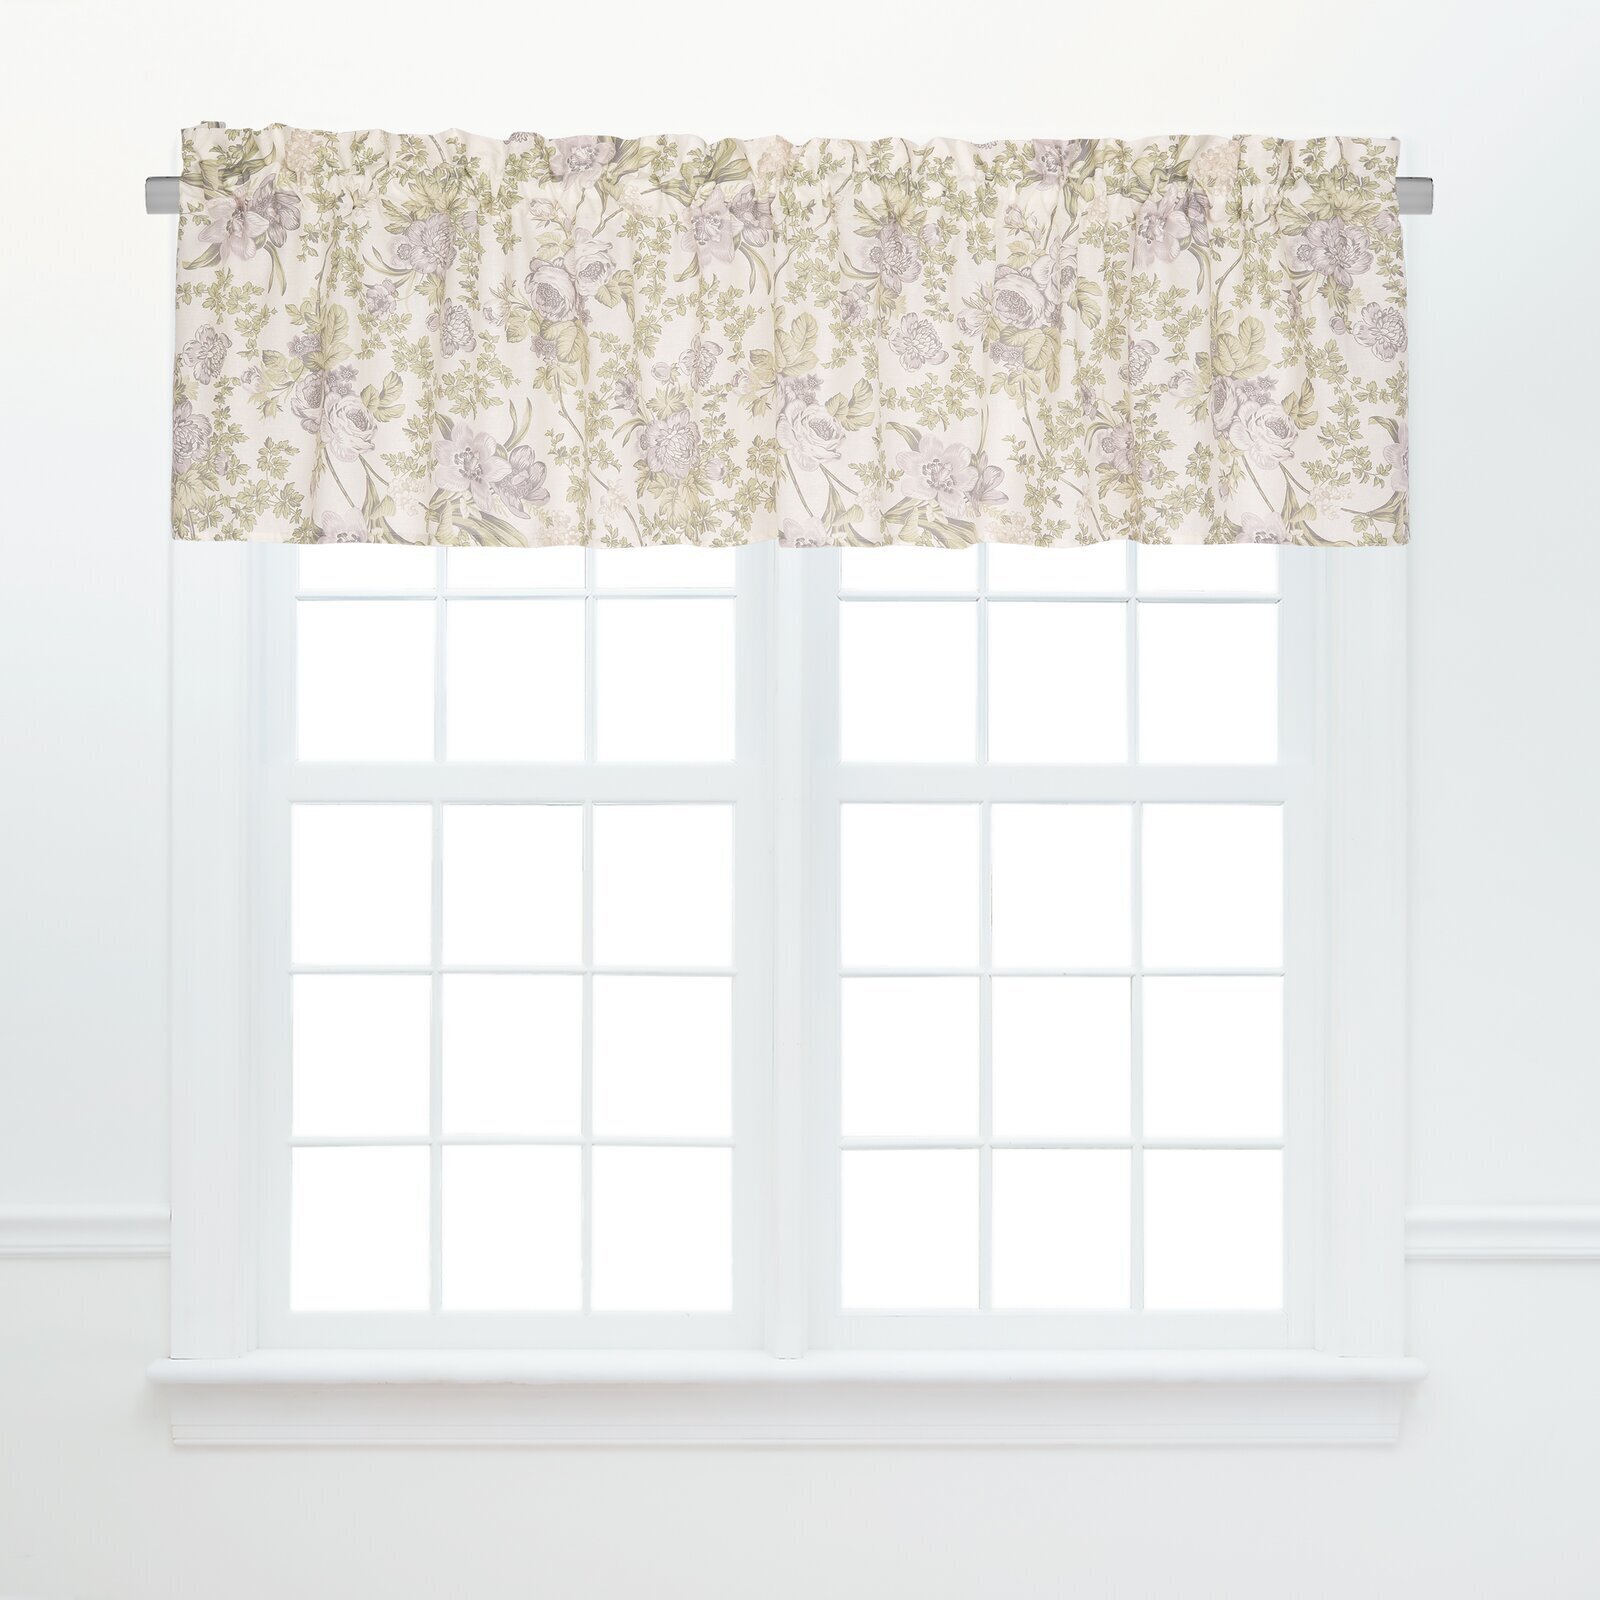 Ruffled Floral Valance For Large Picture Window 